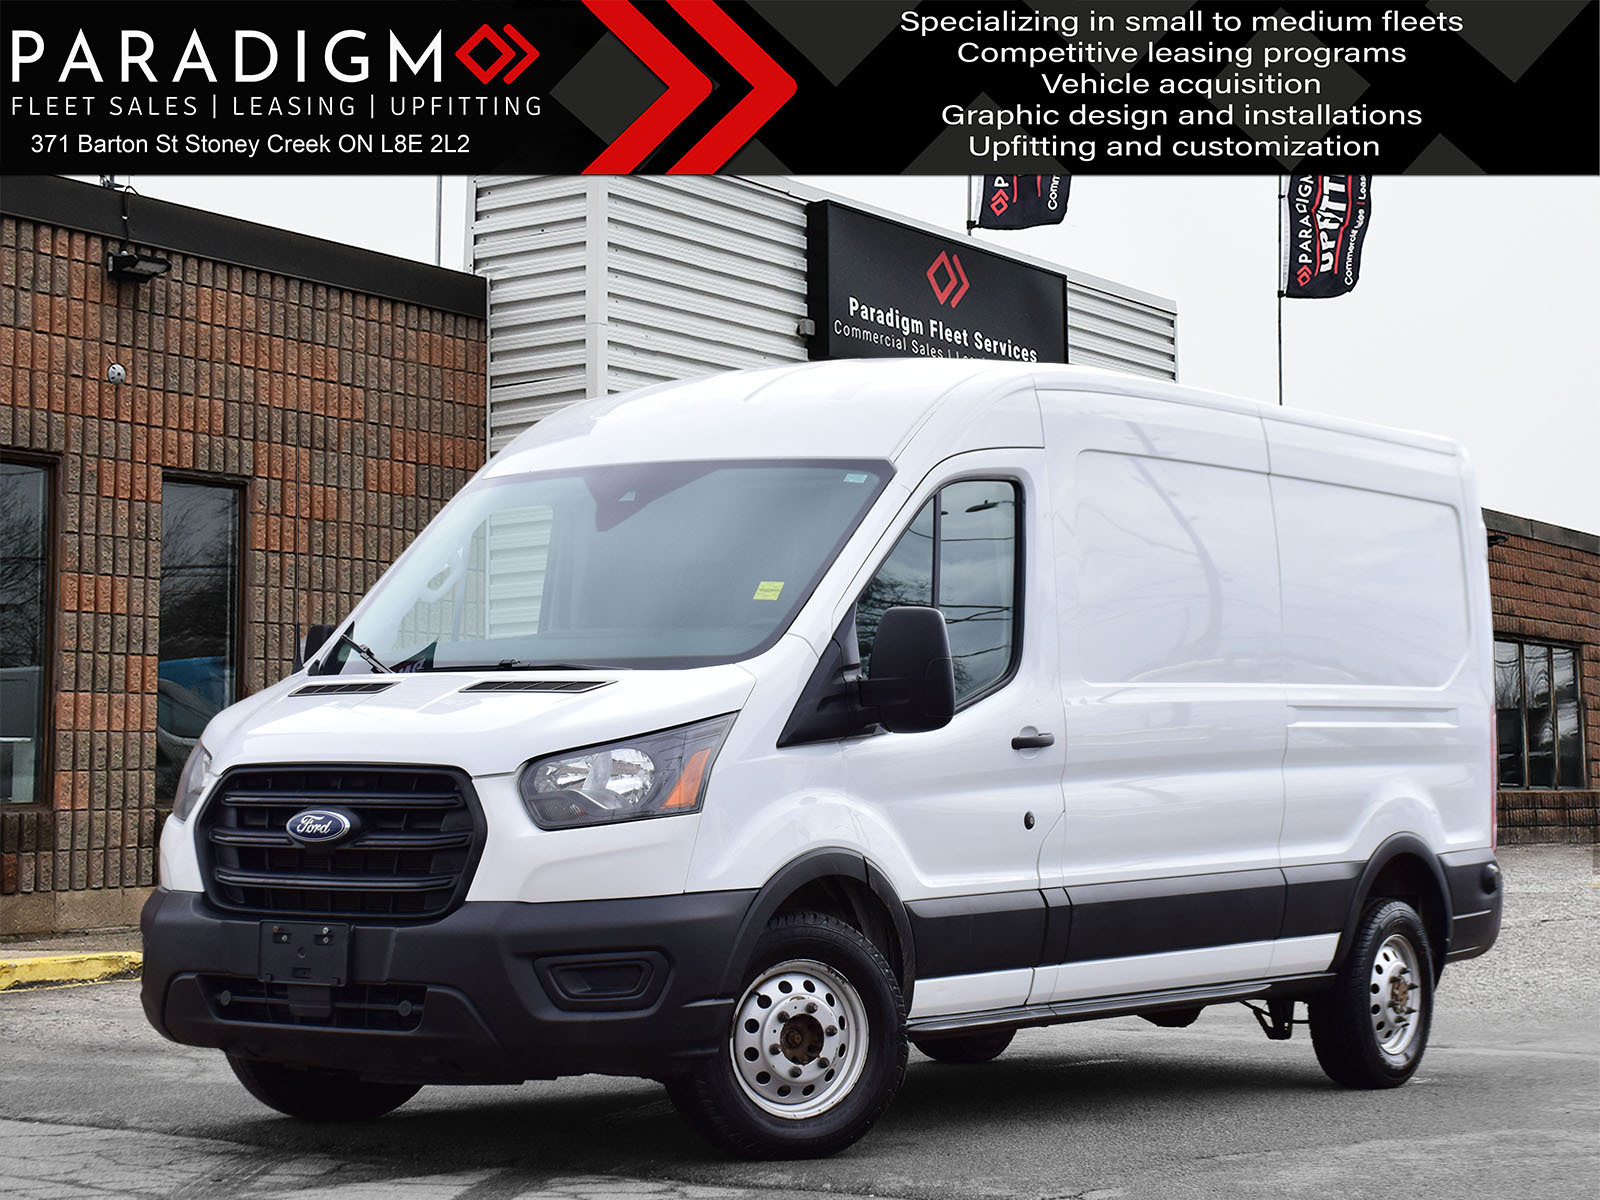 2020 Ford Transit Ecoboost V6 AWD T250 148-Inch WB Mid Roof Cargo